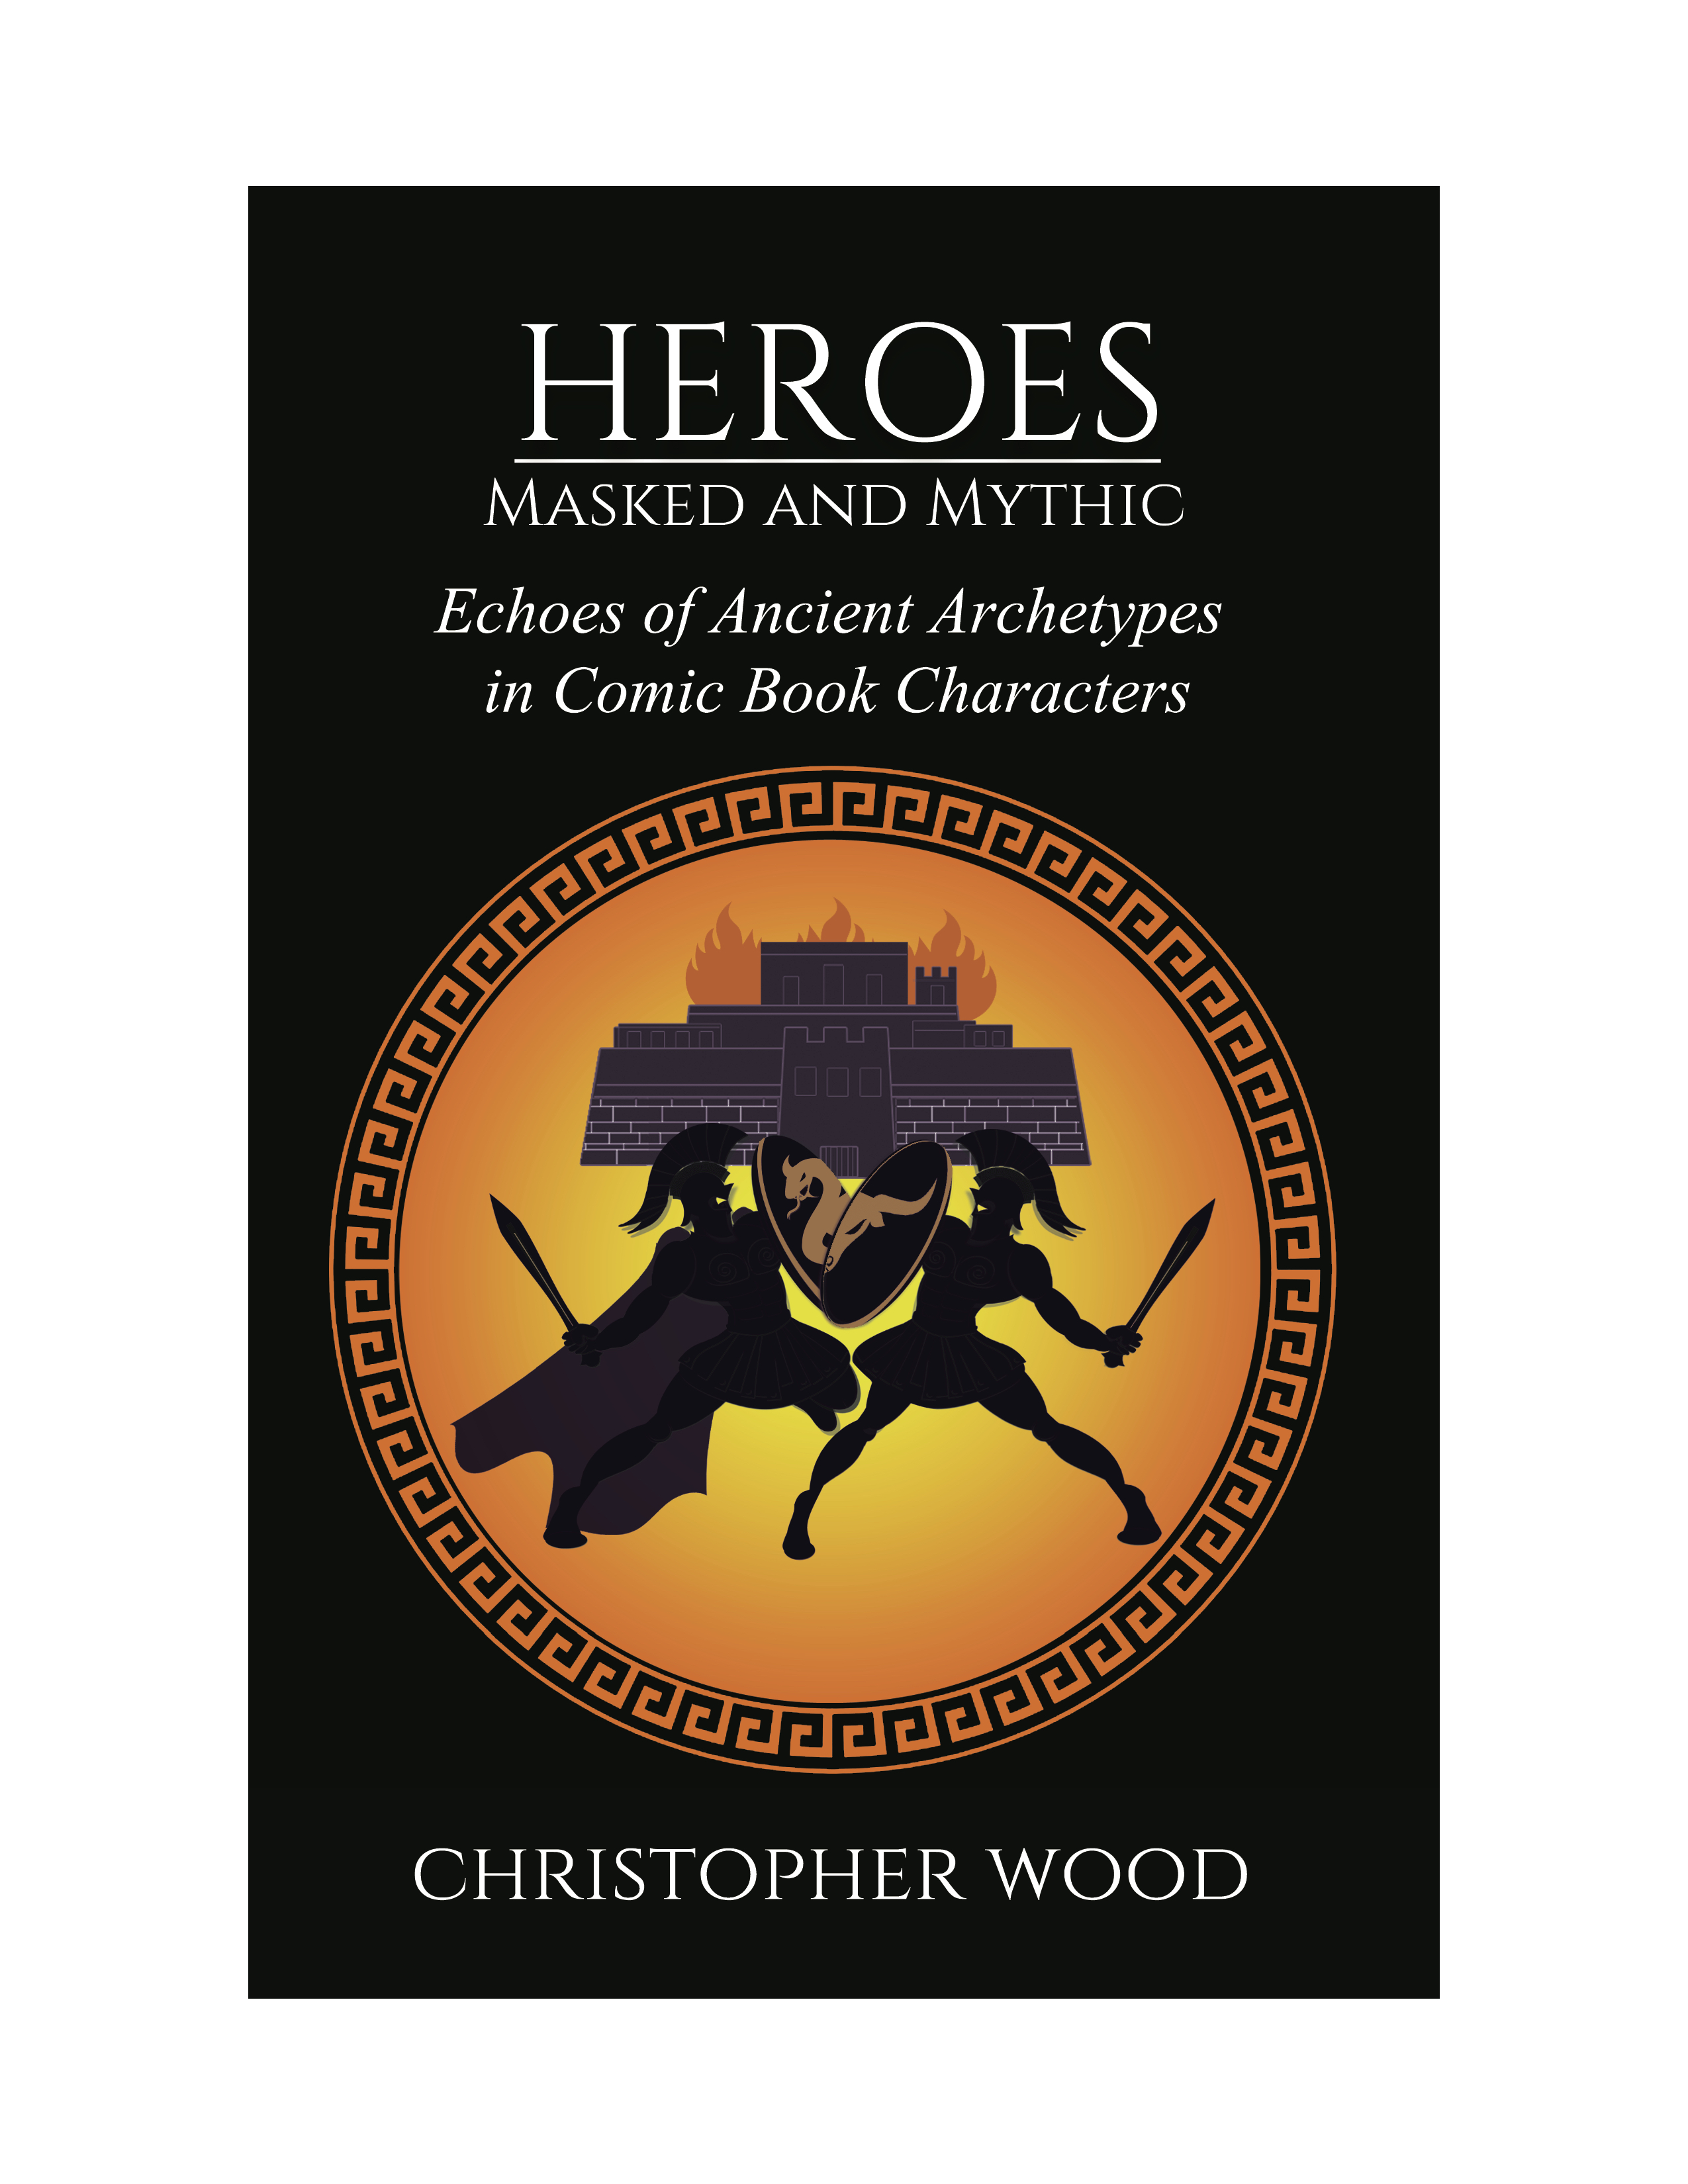 Heroes: Masked and Mythic by Christopher Wood